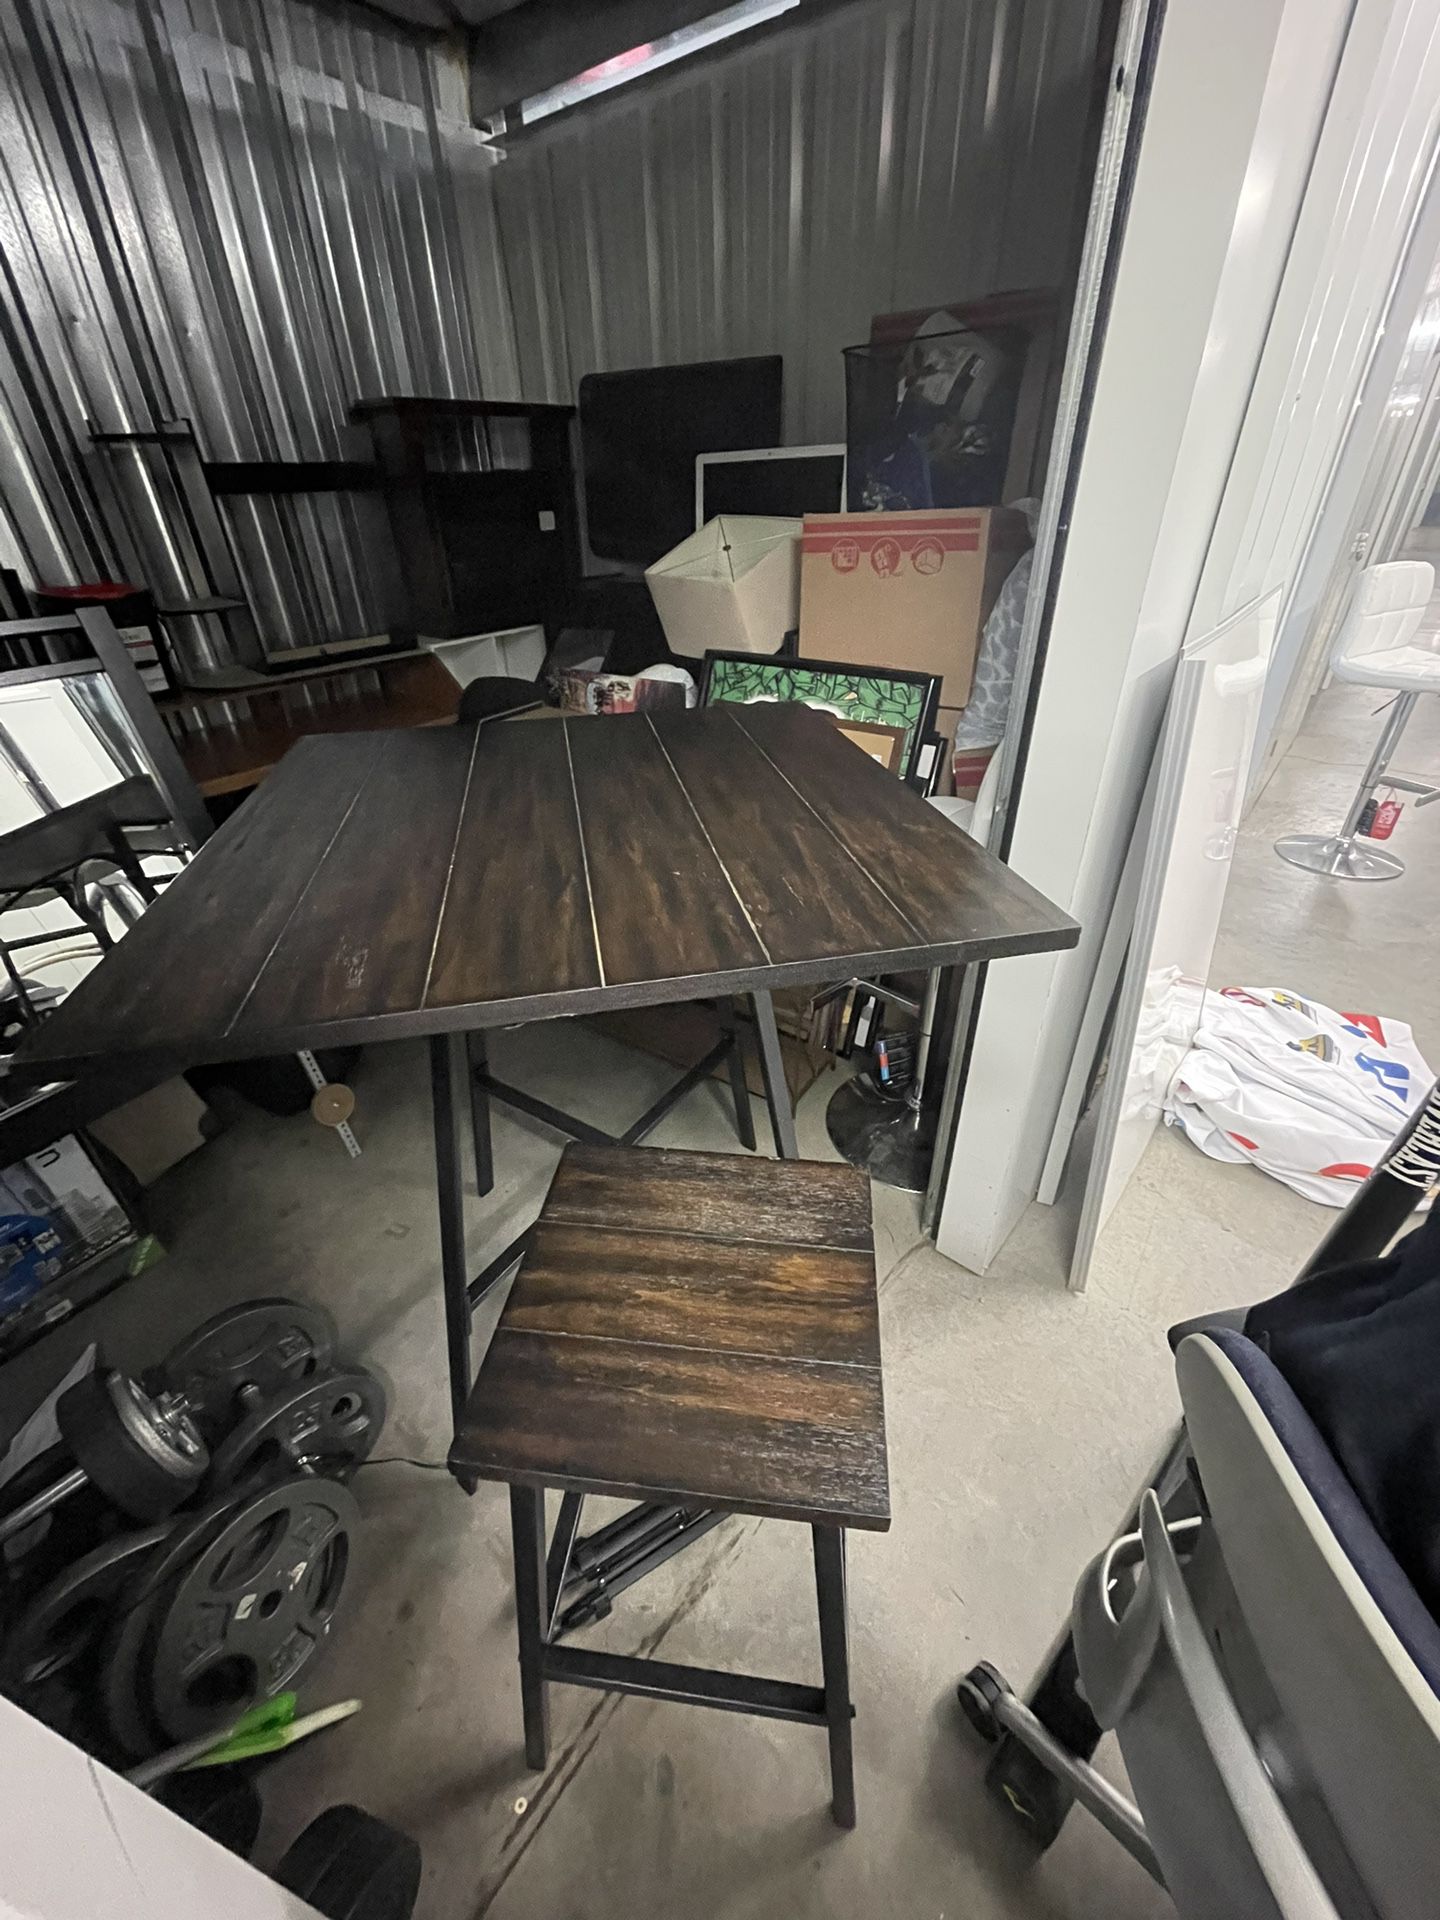 Kitchen Table For Sale With Barstools